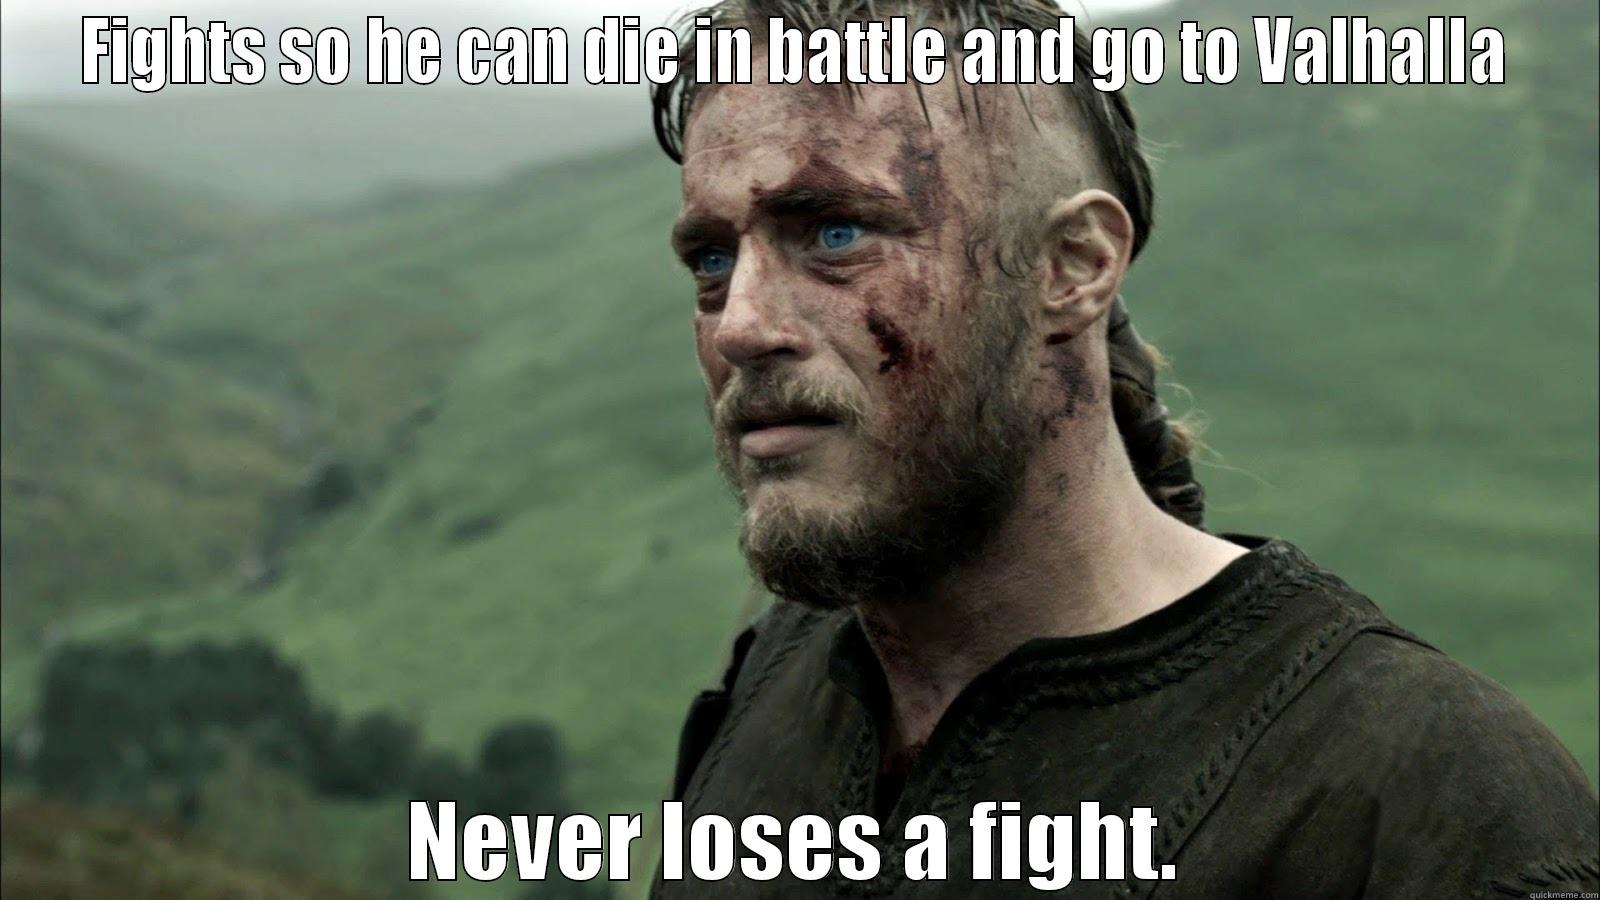 FIGHTS SO HE CAN DIE IN BATTLE AND GO TO VALHALLA NEVER LOSES A FIGHT. Misc